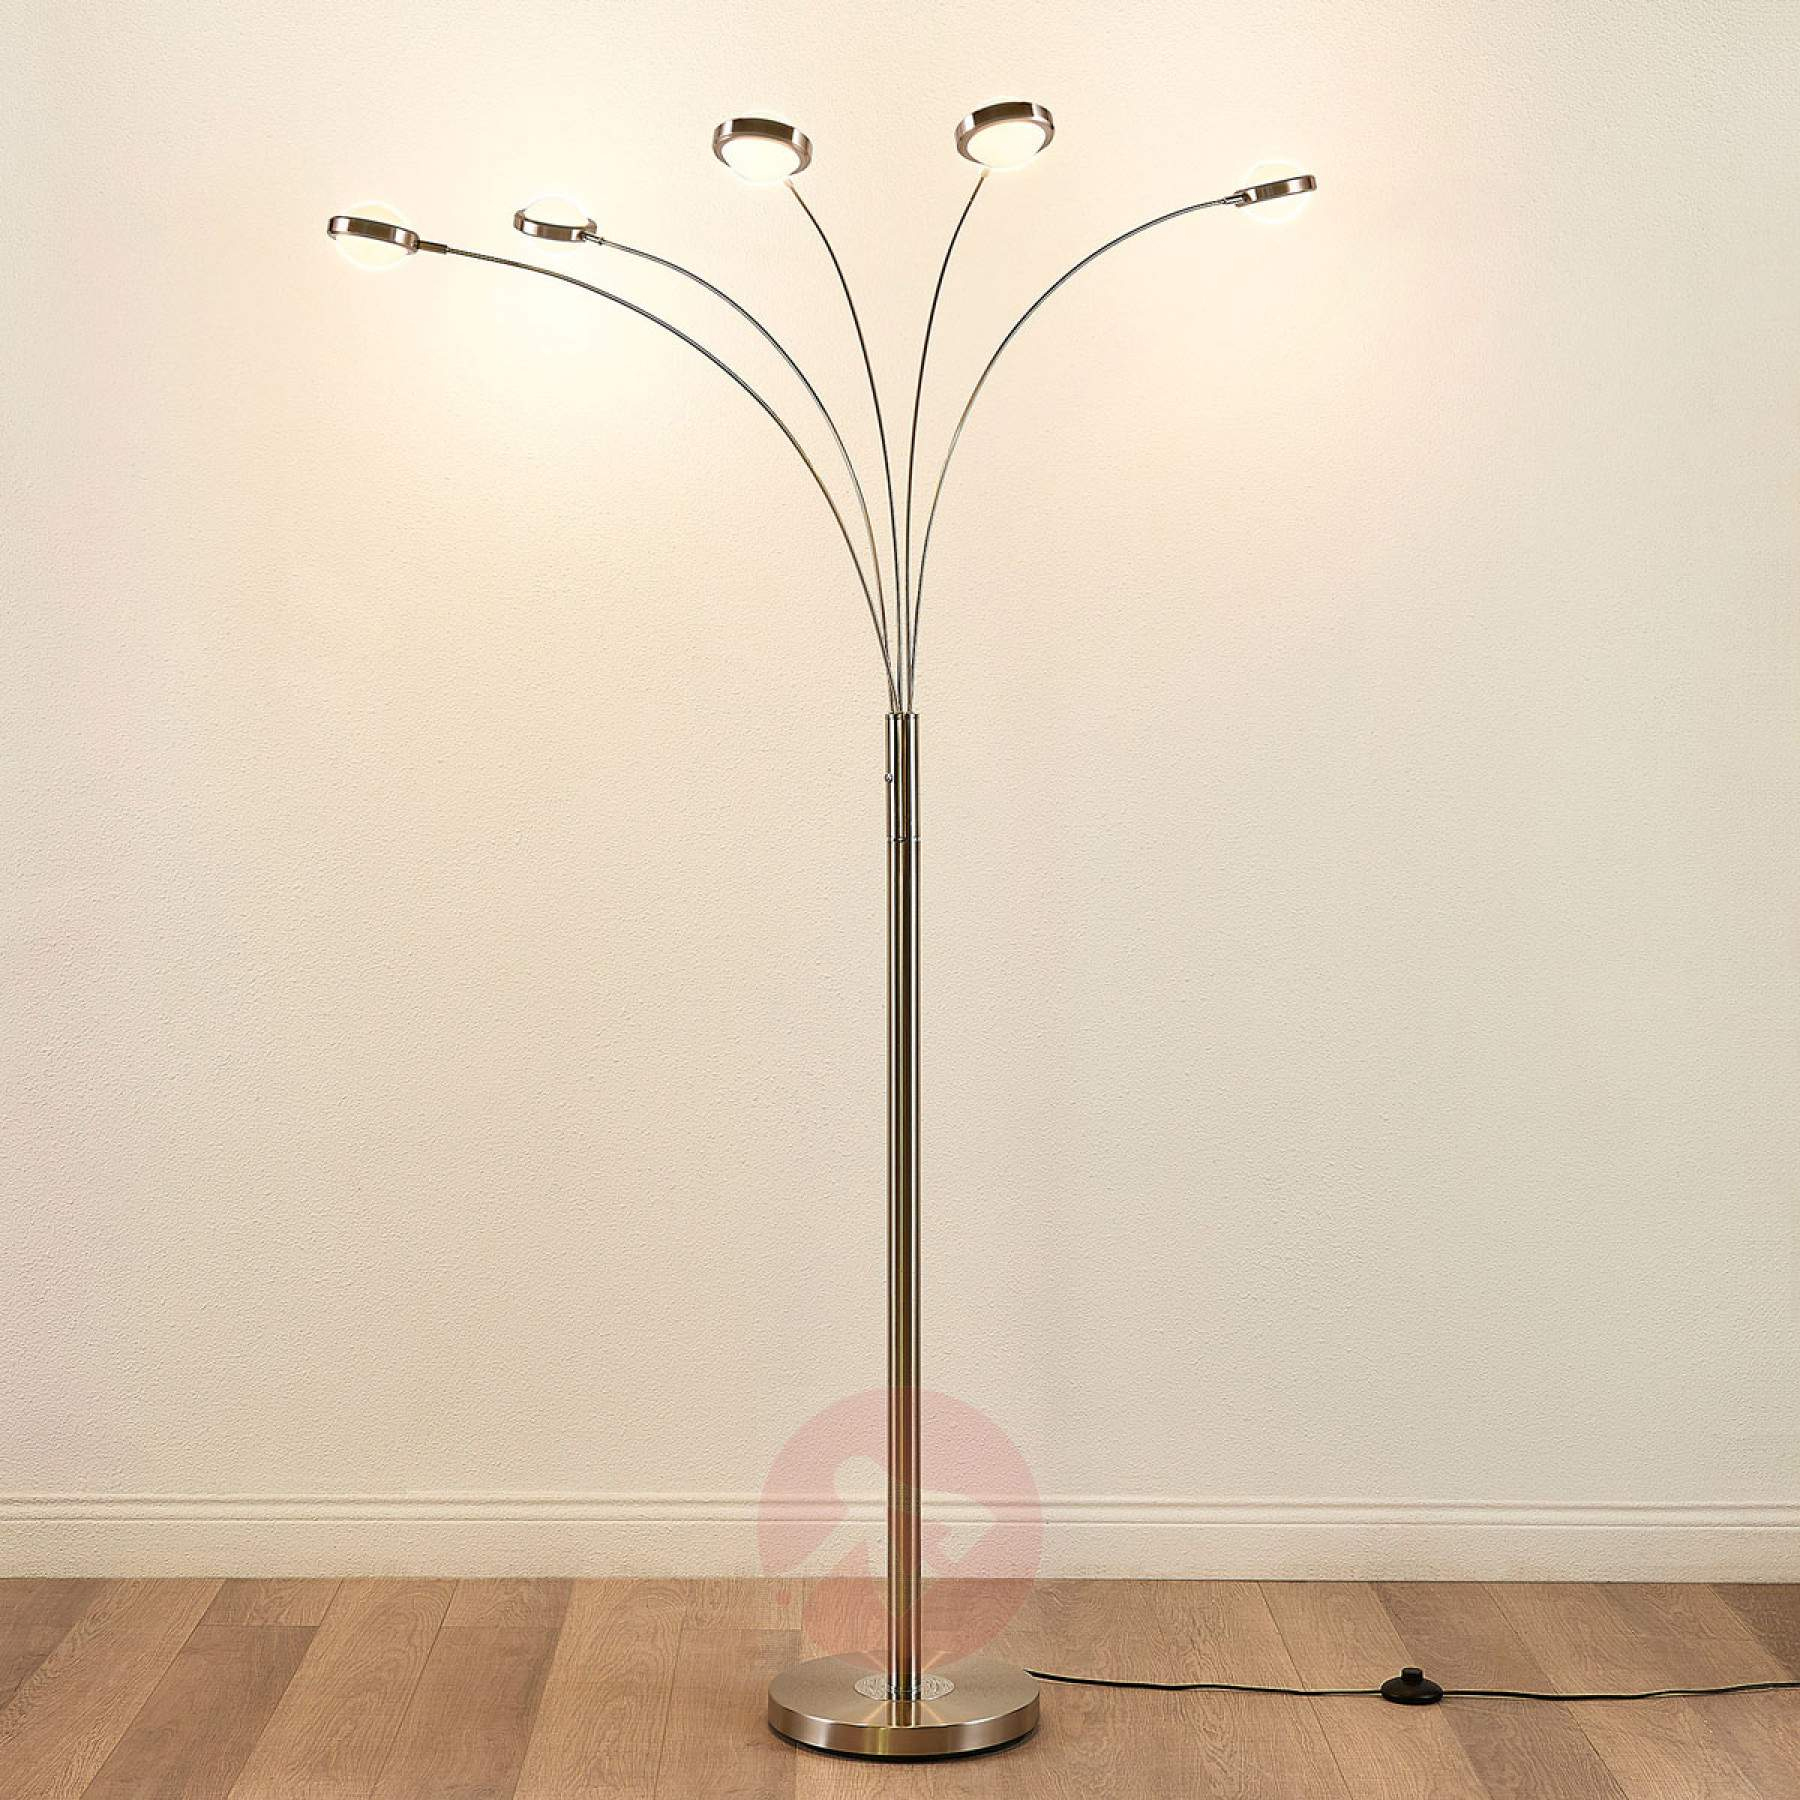 Five Bulb Led Floor Lamp Catriona With Dimmer regarding sizing 1800 X 1800